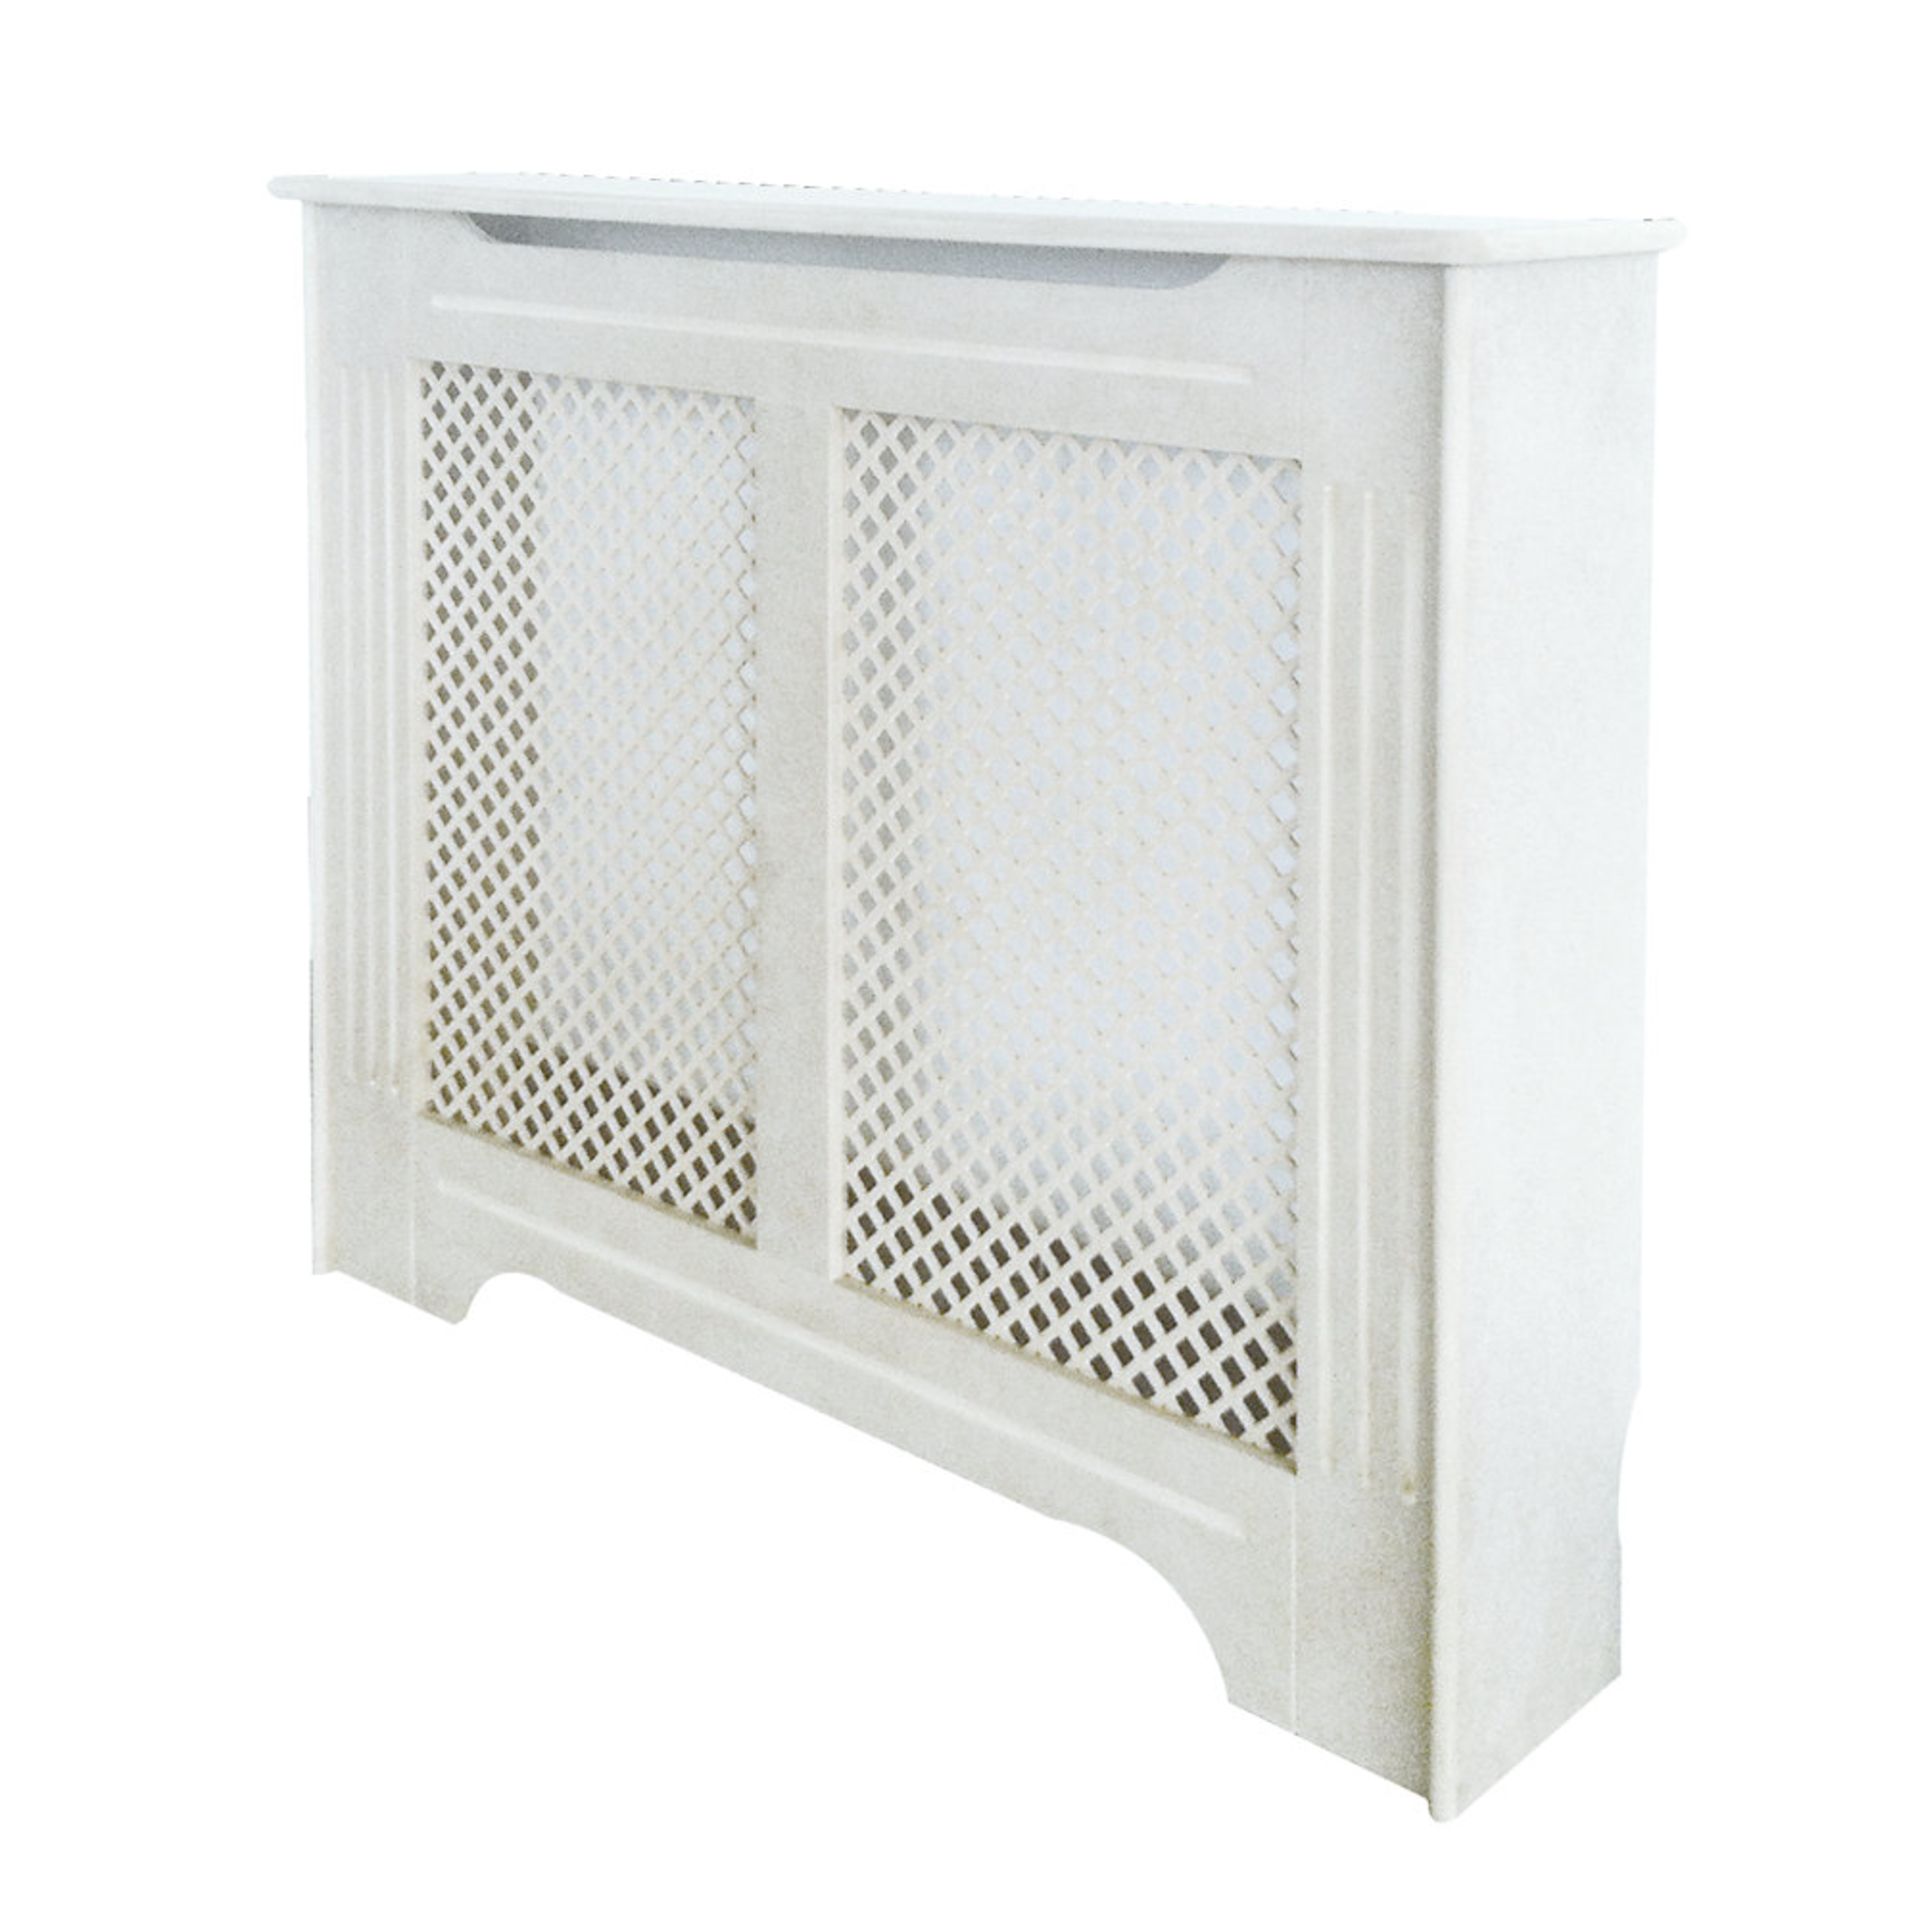 New (H79) Torian Radiator Cover White 1220 x 210 x 918mm. White Finish. Provides A Practical So...